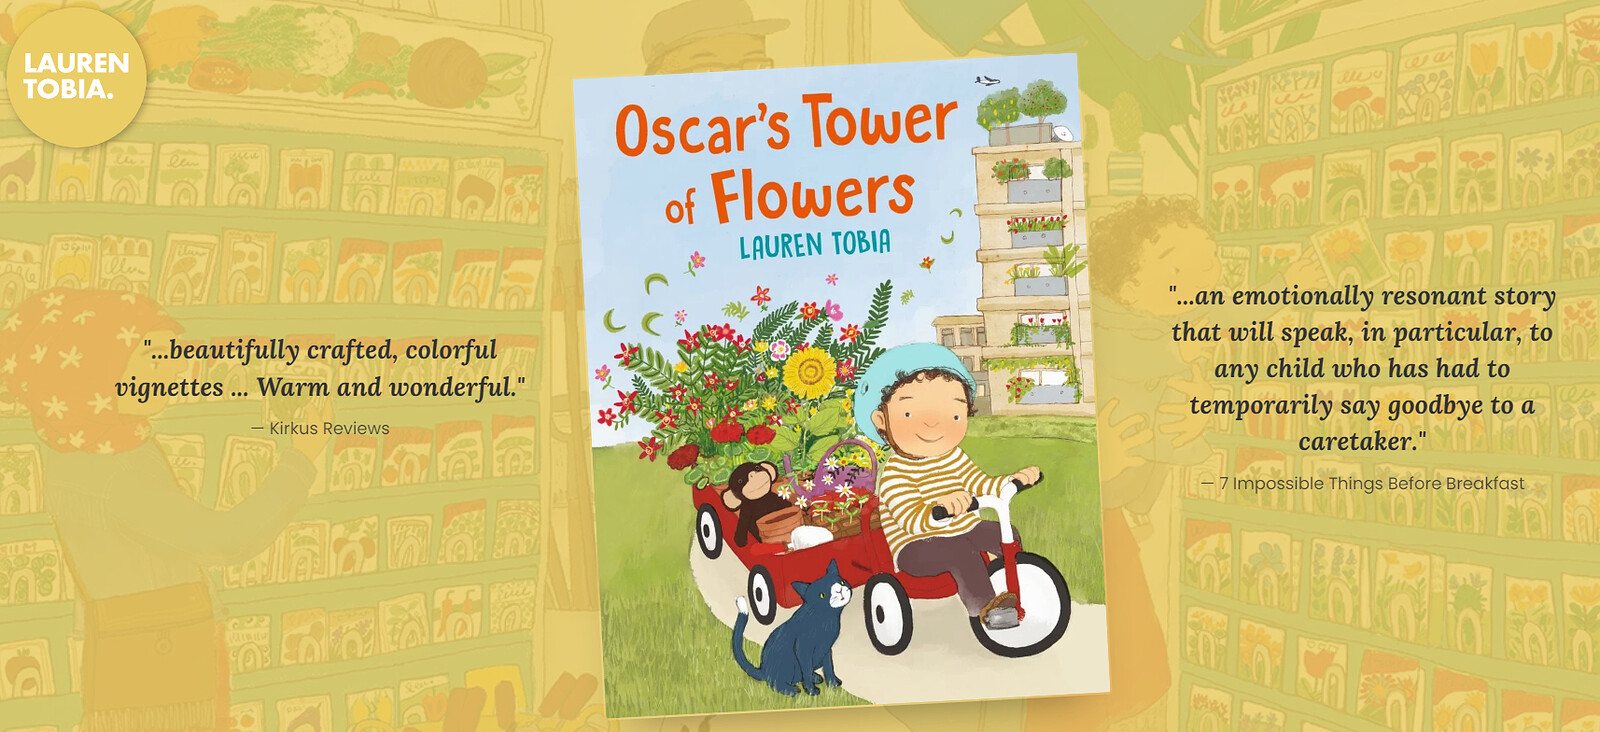 ‘Oscar’s Tower of Flowers’ Kids Reading Group at PRSC